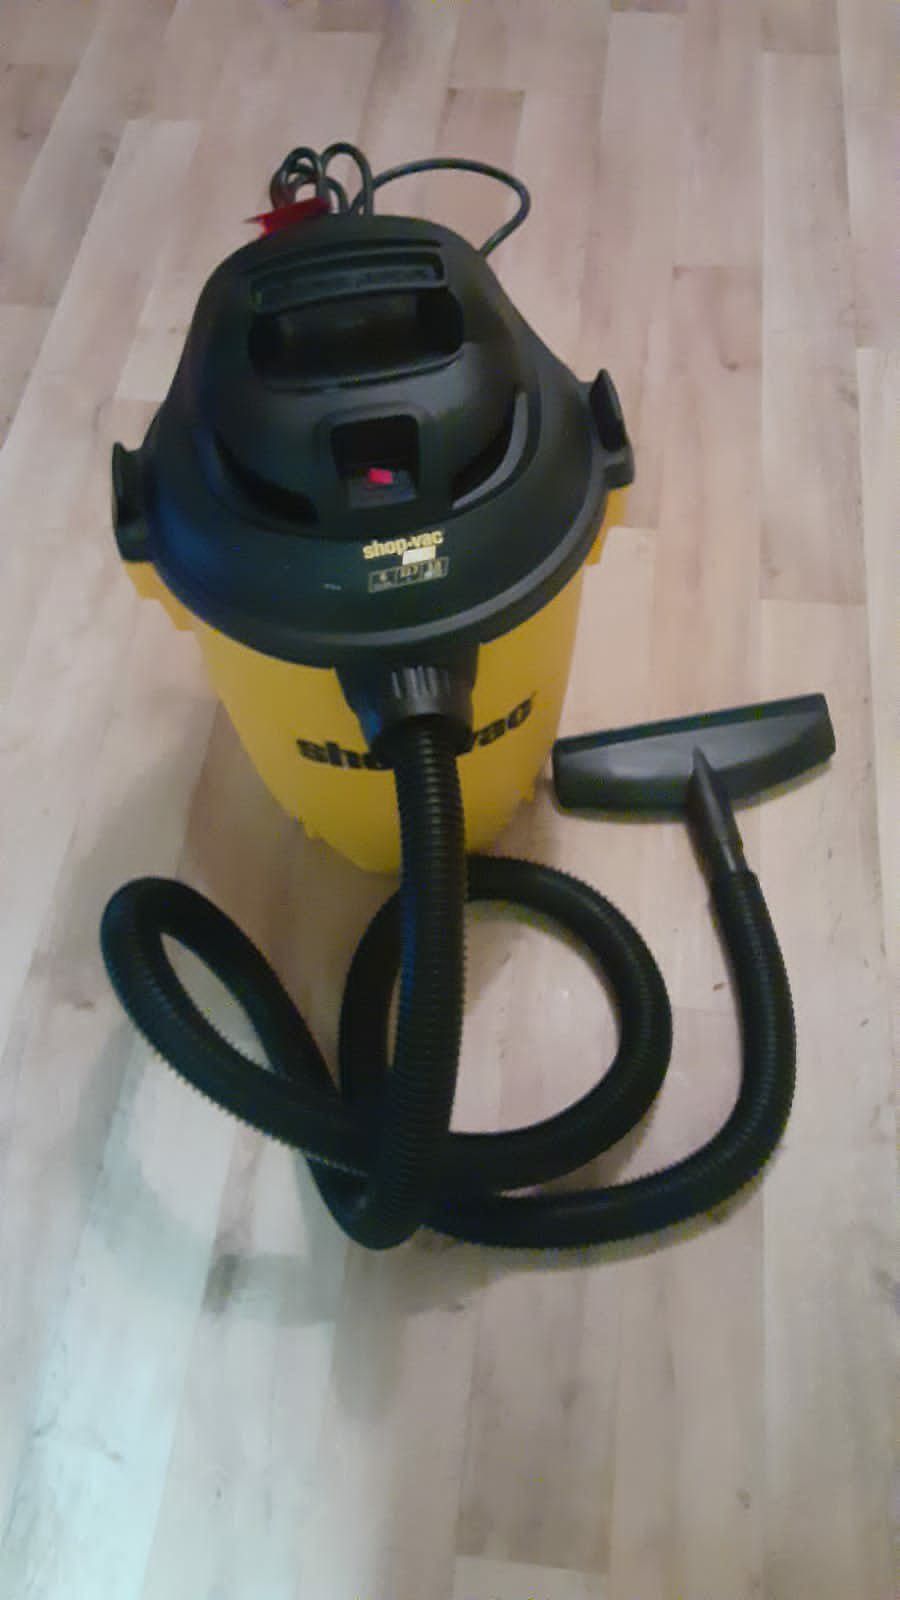 Vacuum cleaner works perfectly well. Used only once